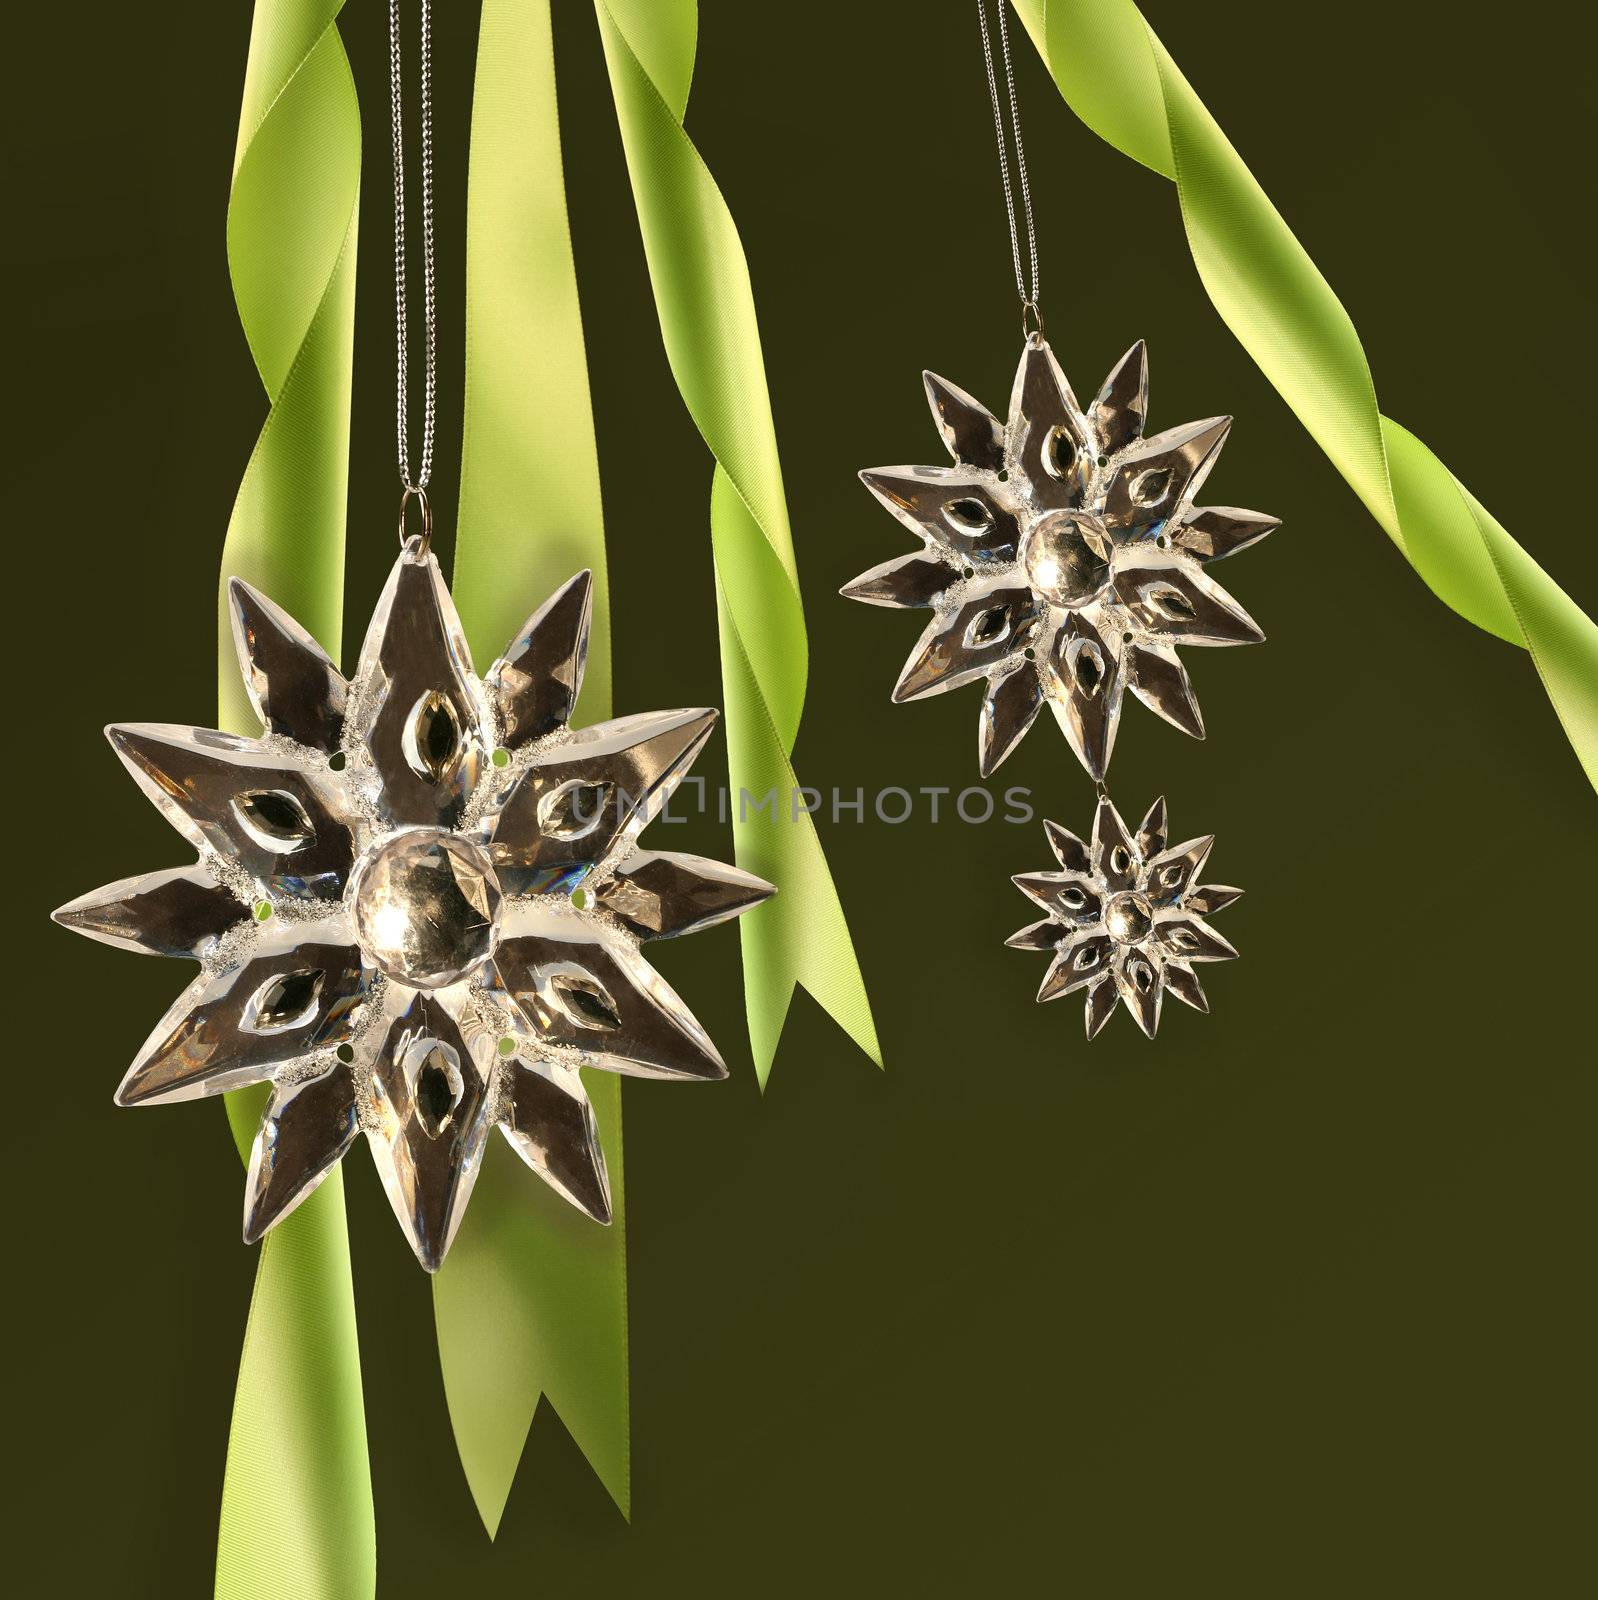 Crystal snowflakes with green ribbons  by Sandralise